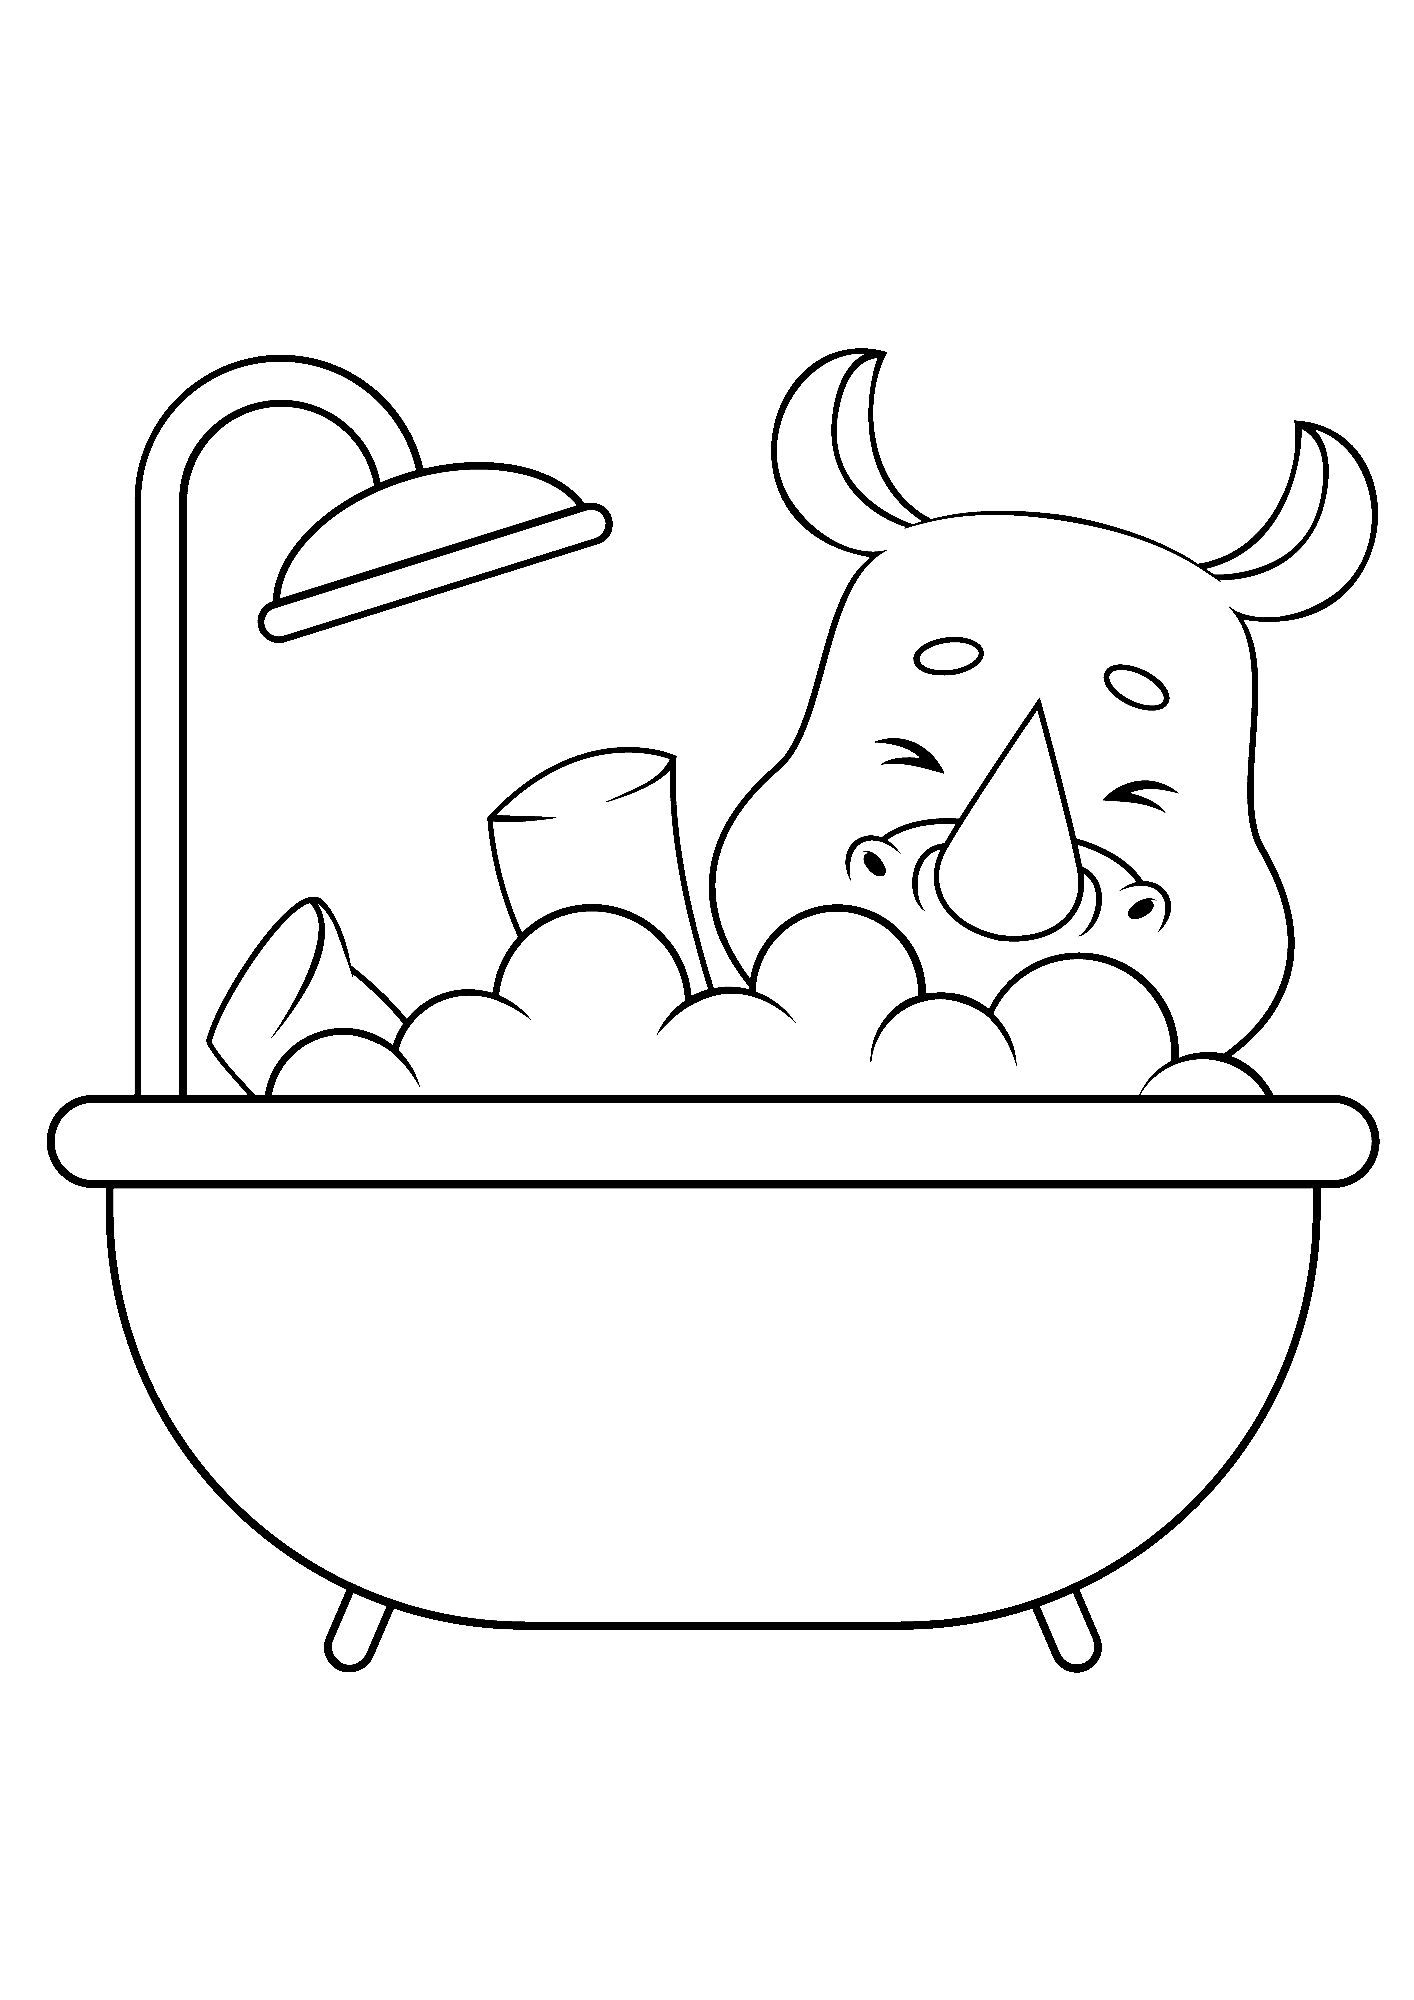 Rhino Drawing For Children Coloring Pages